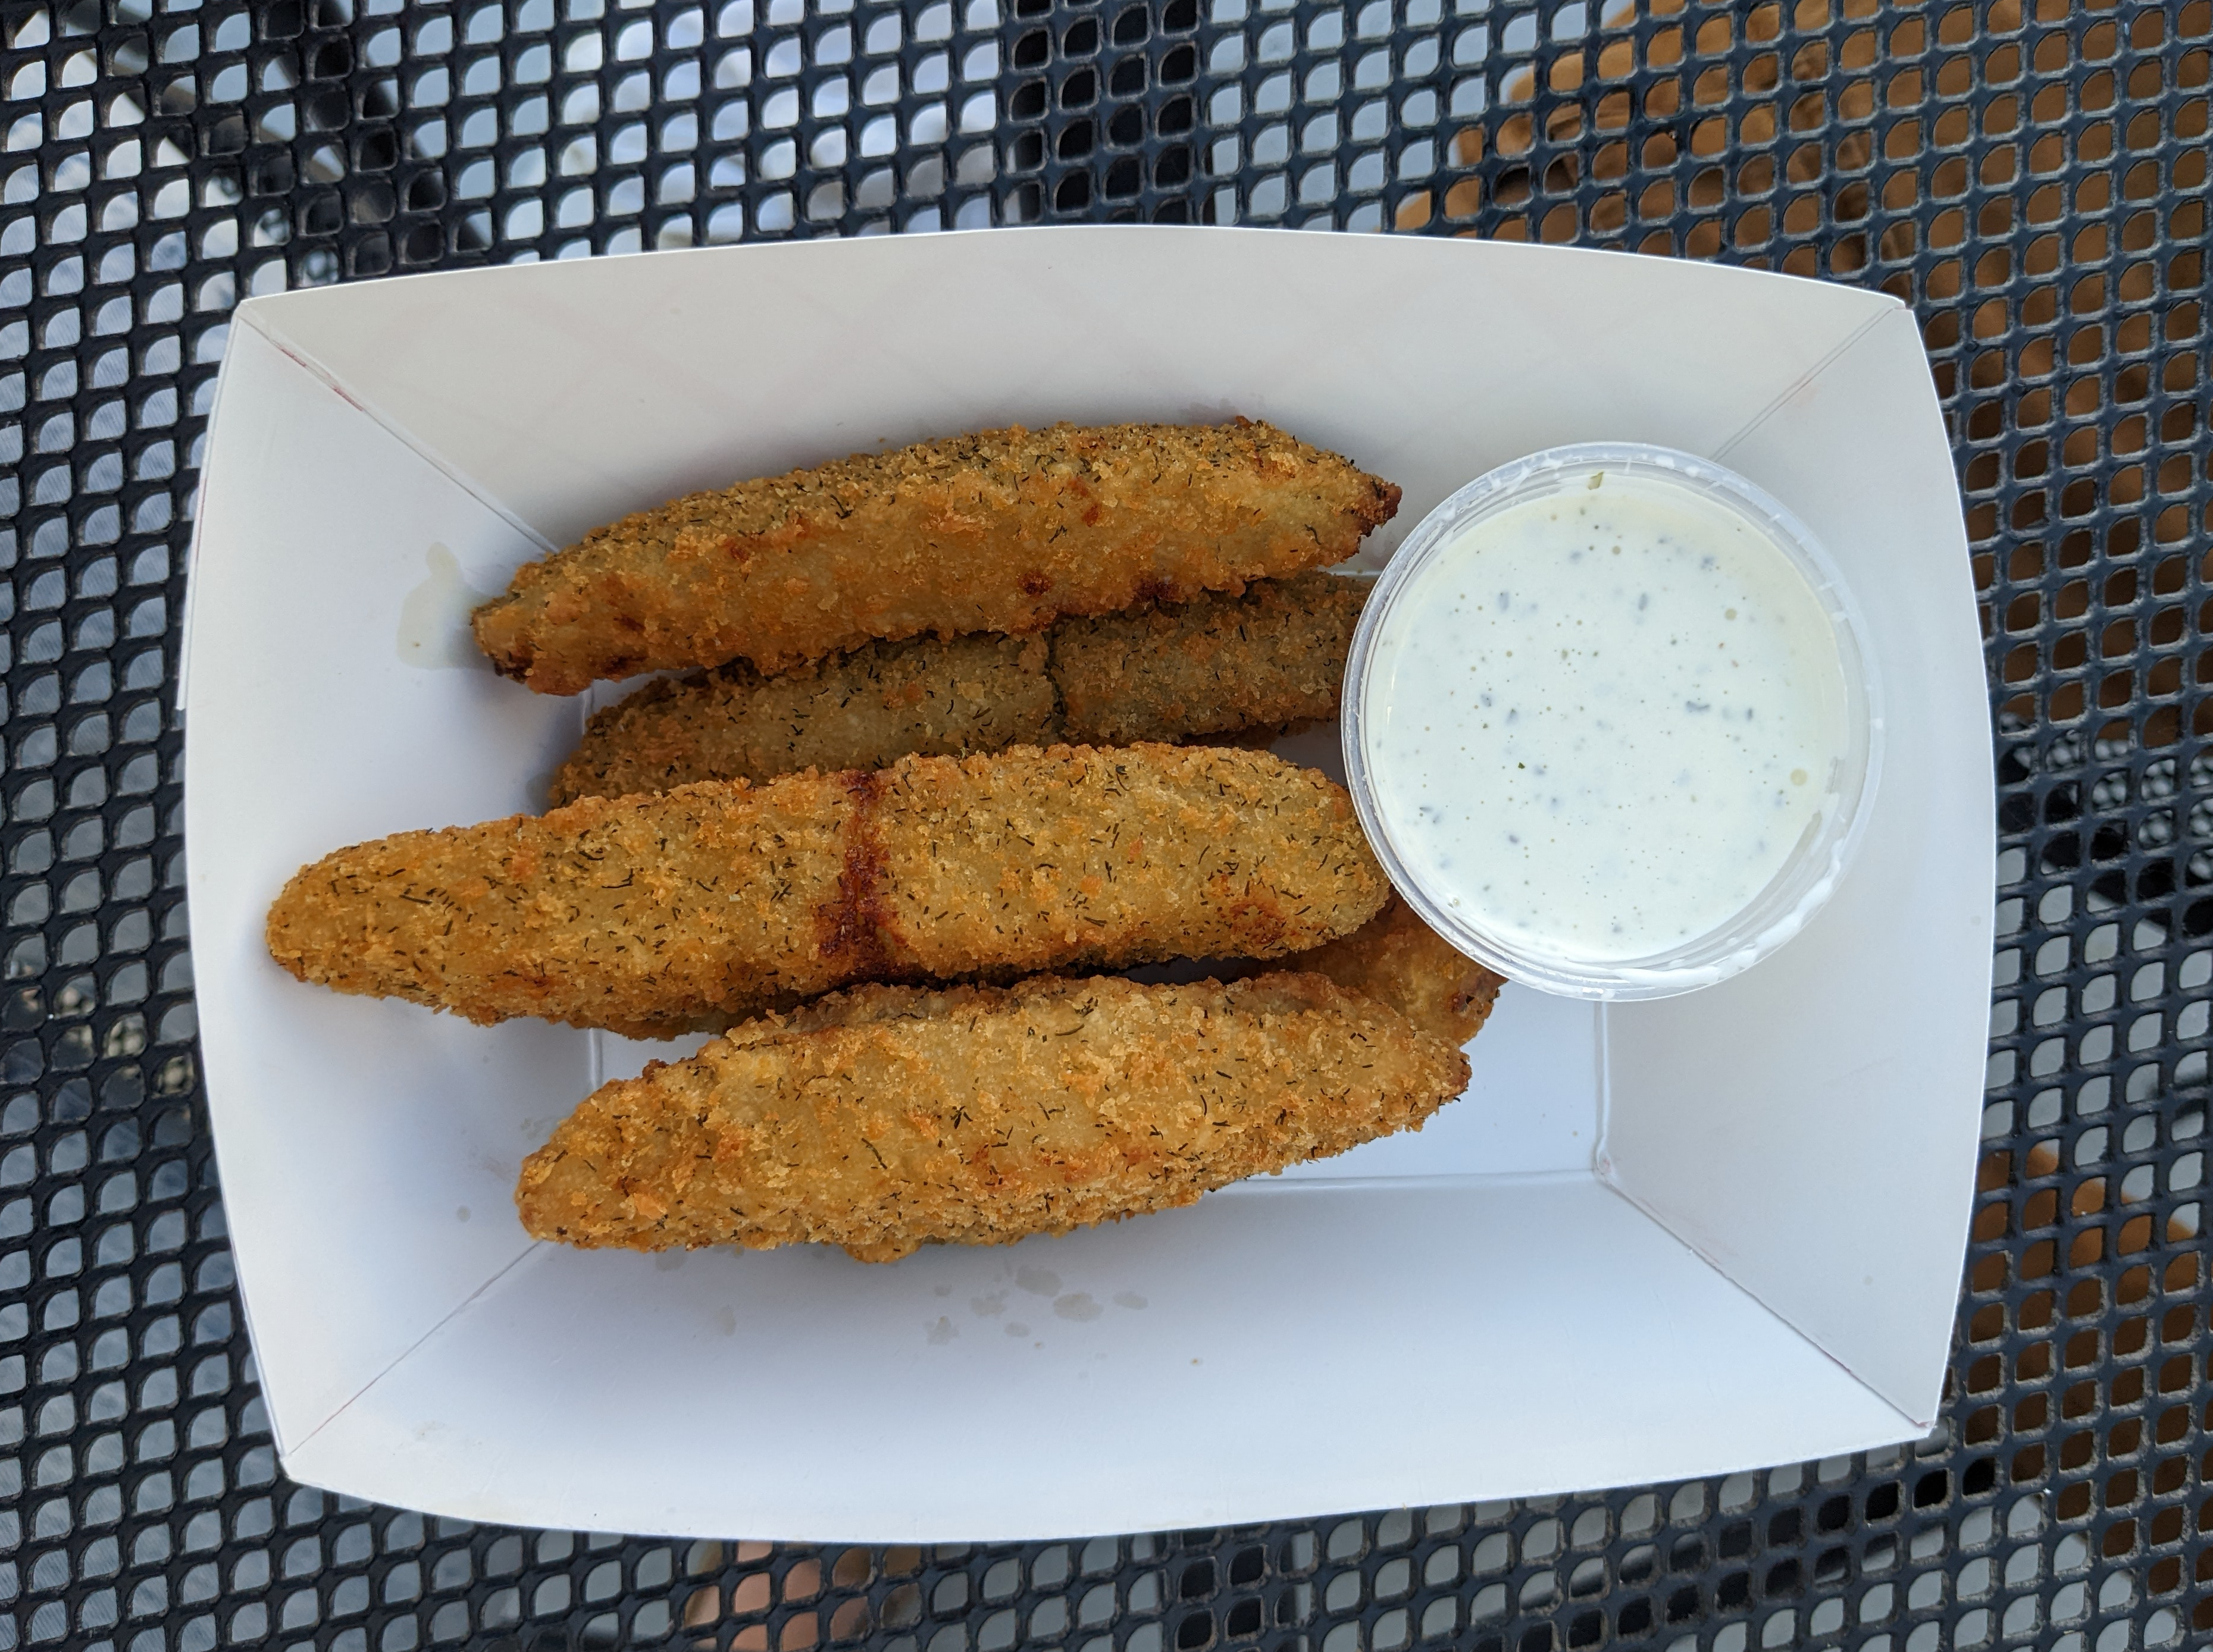 On a black bistro table outside at Bunny's Tavern in Urbana, there is a paper basket of five fried pickle spears. Photo by Tayler Neumann.